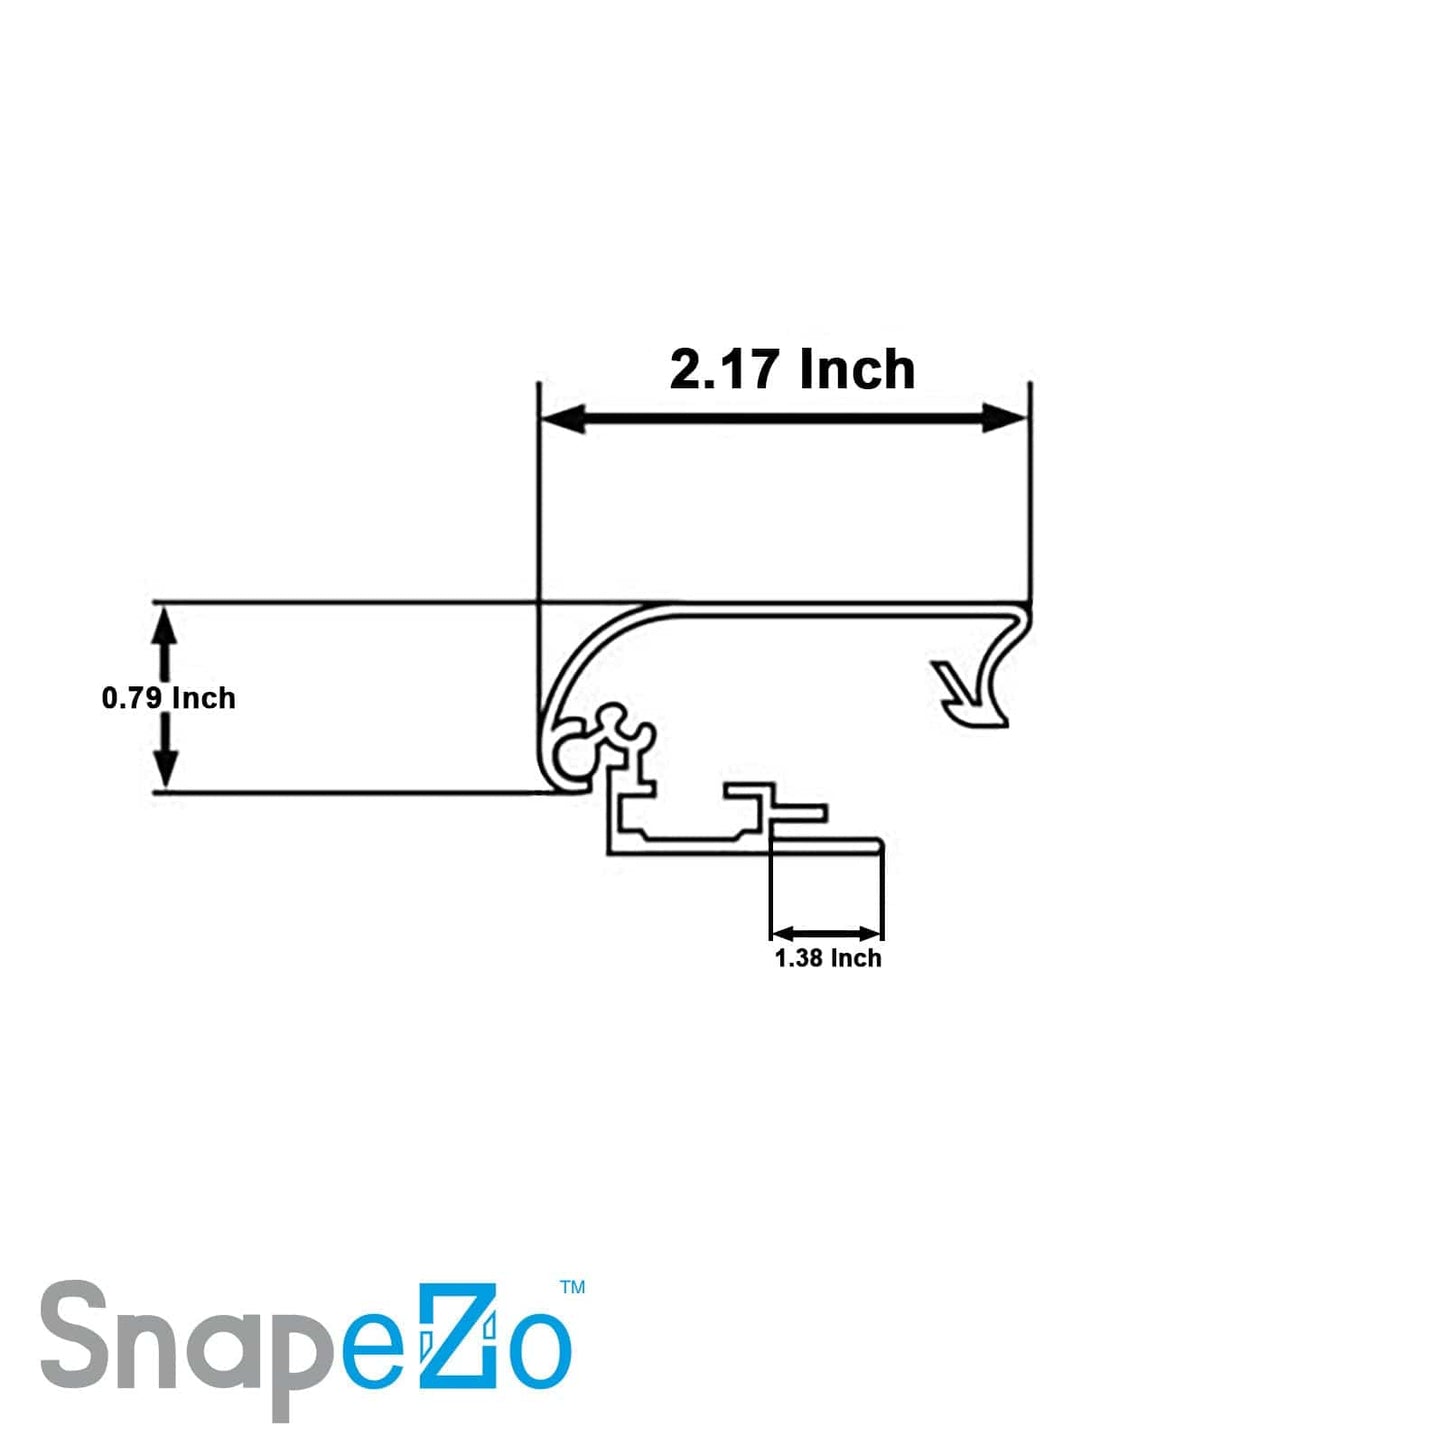 27x40 Inches Silver SnapeZo® Snap Frame - 2.2" profile - Snap Frames Direct